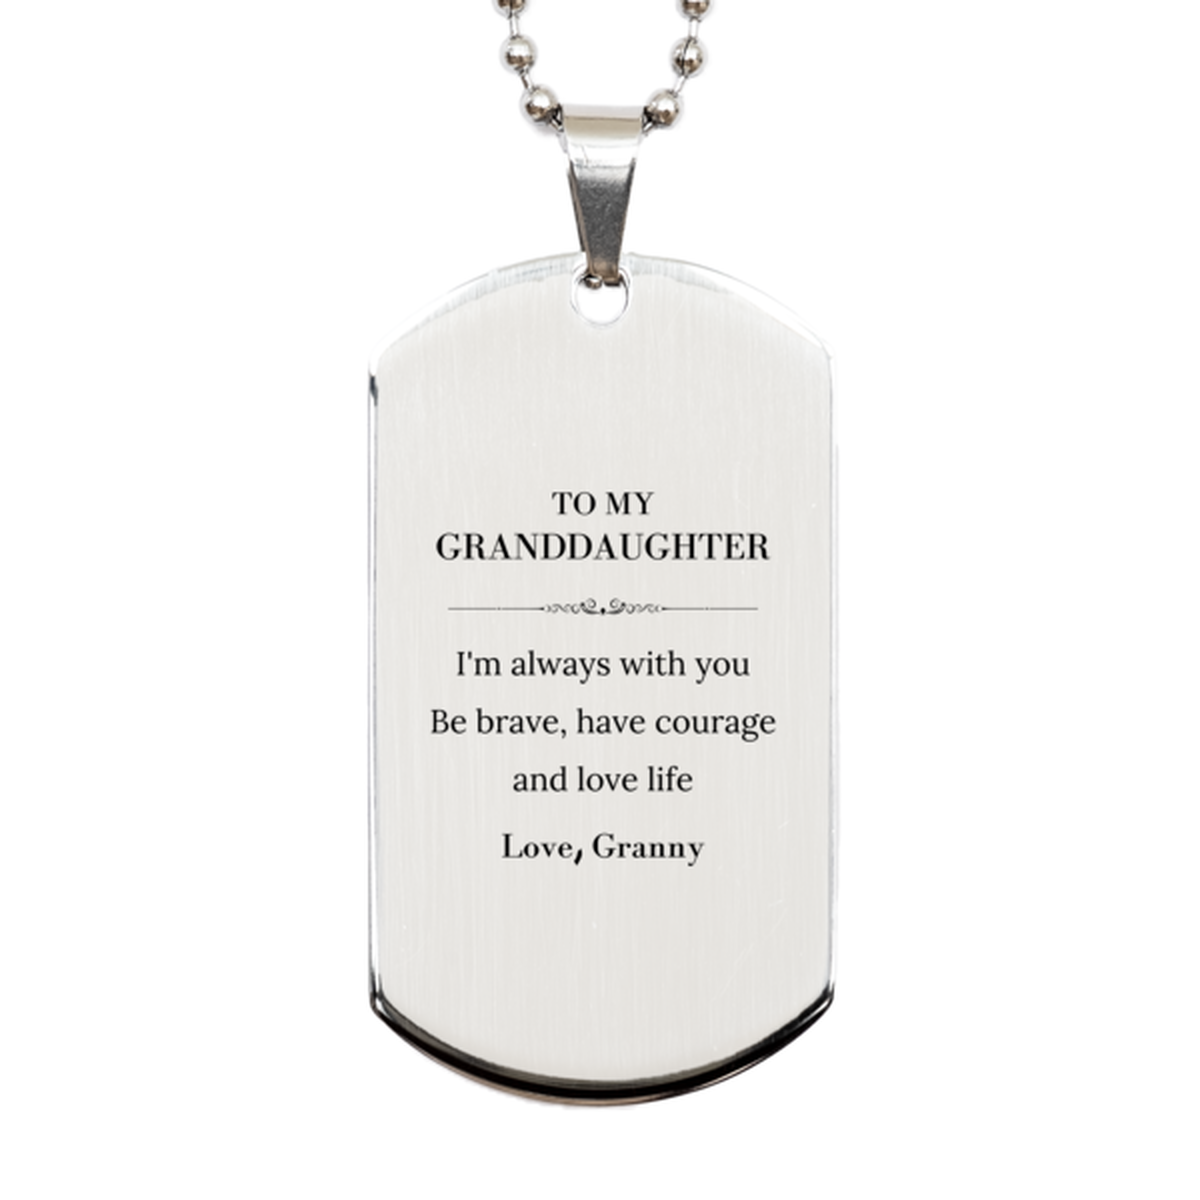 To My Granddaughter Gifts from Granny, Unique Silver Dog Tag Inspirational Christmas Birthday Graduation Gifts for Granddaughter I'm always with you. Be brave, have courage and love life. Love, Granny